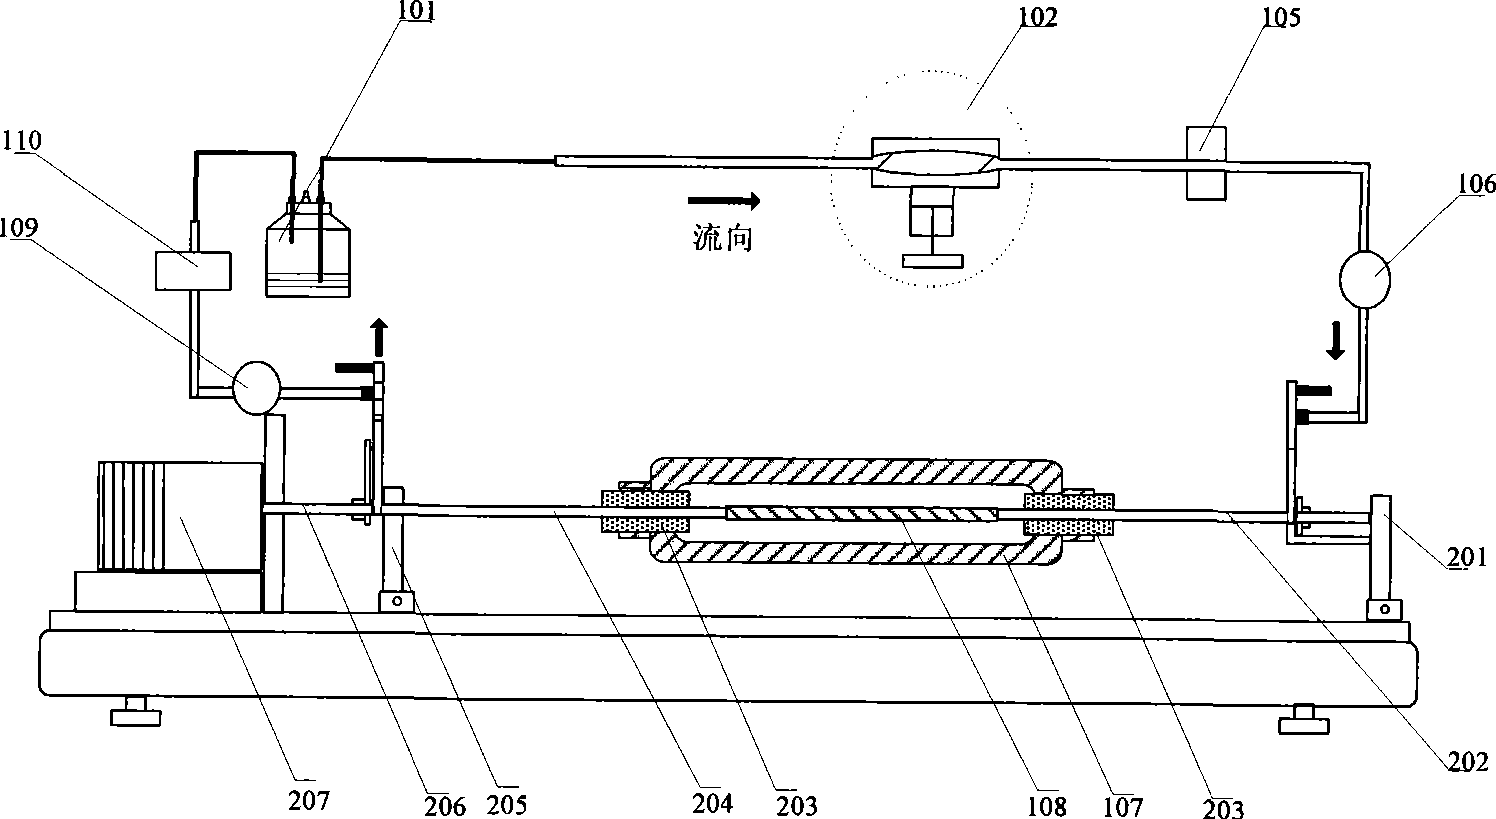 Vascular tissue engineering reactor having vas stretch and pulsating flow pouring functions